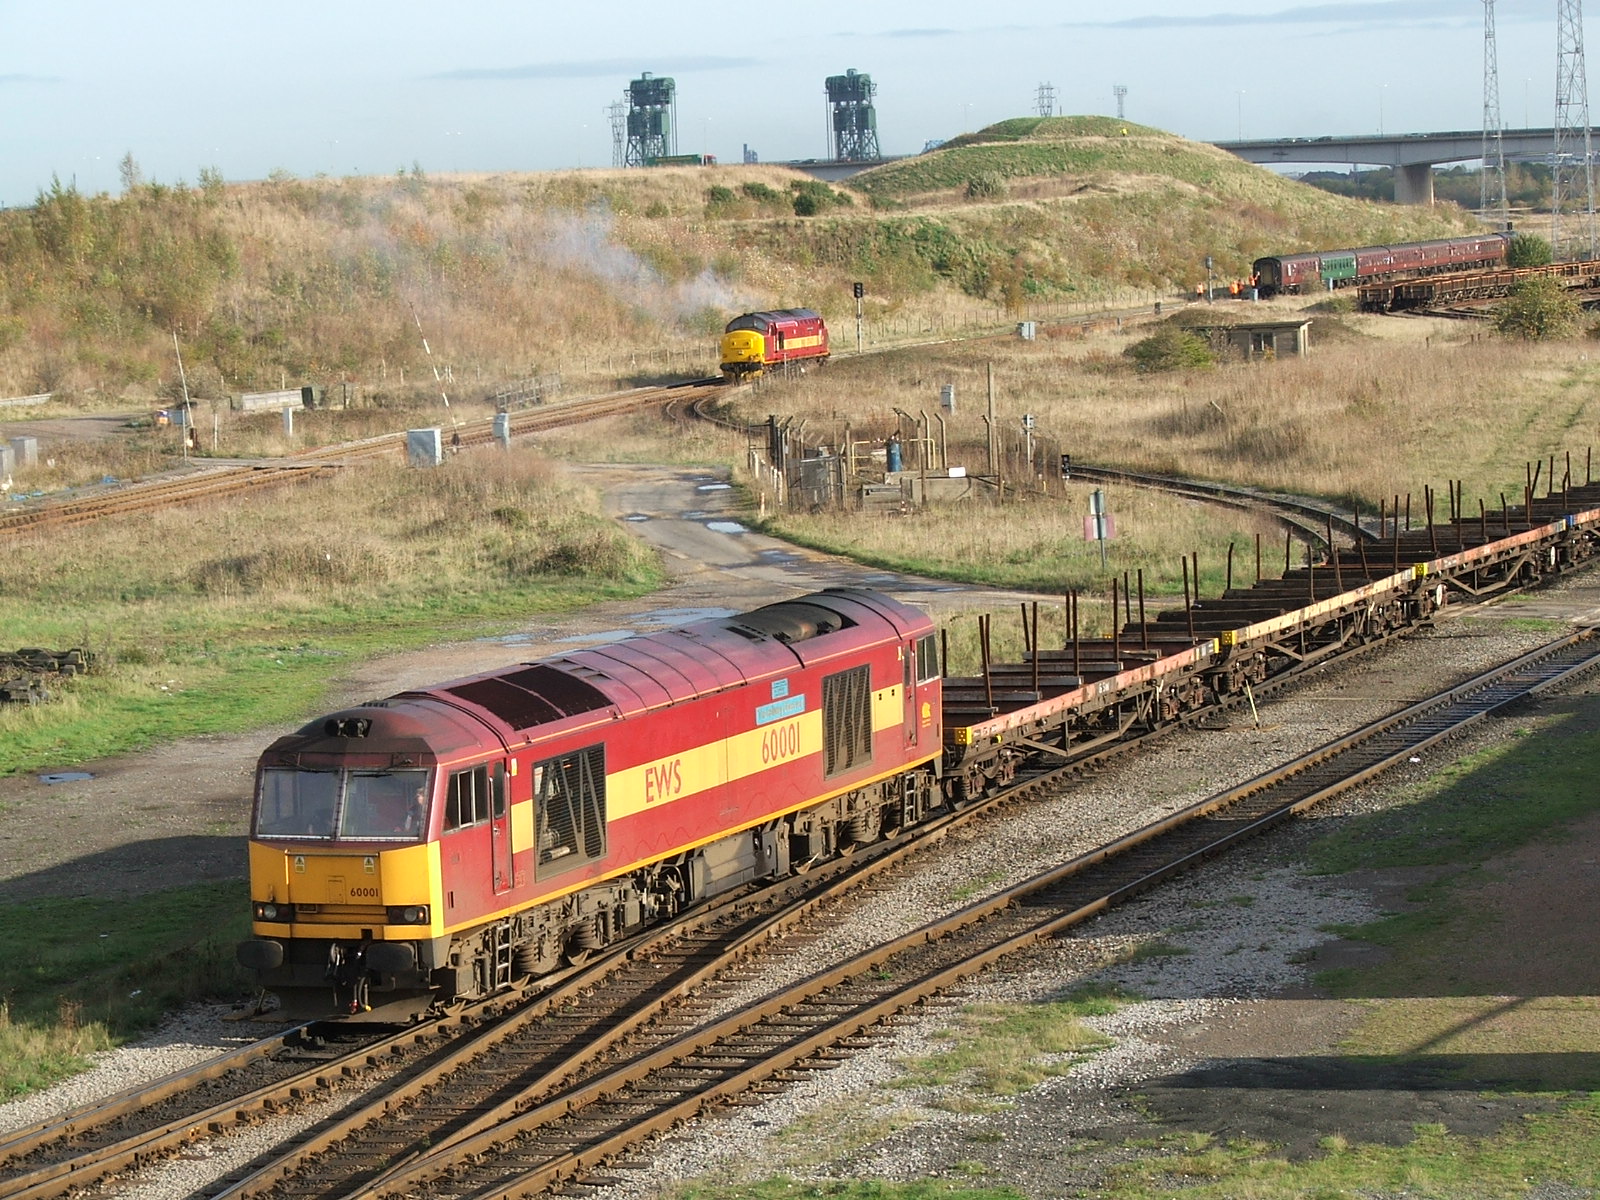 60001 reversing steel empties into Tees yard having arrived from the east, 5th November 2005. Jonathan Granger
In the background 37417 runs round a Branch Line Society rail tour with 37416 at the far end of the train.